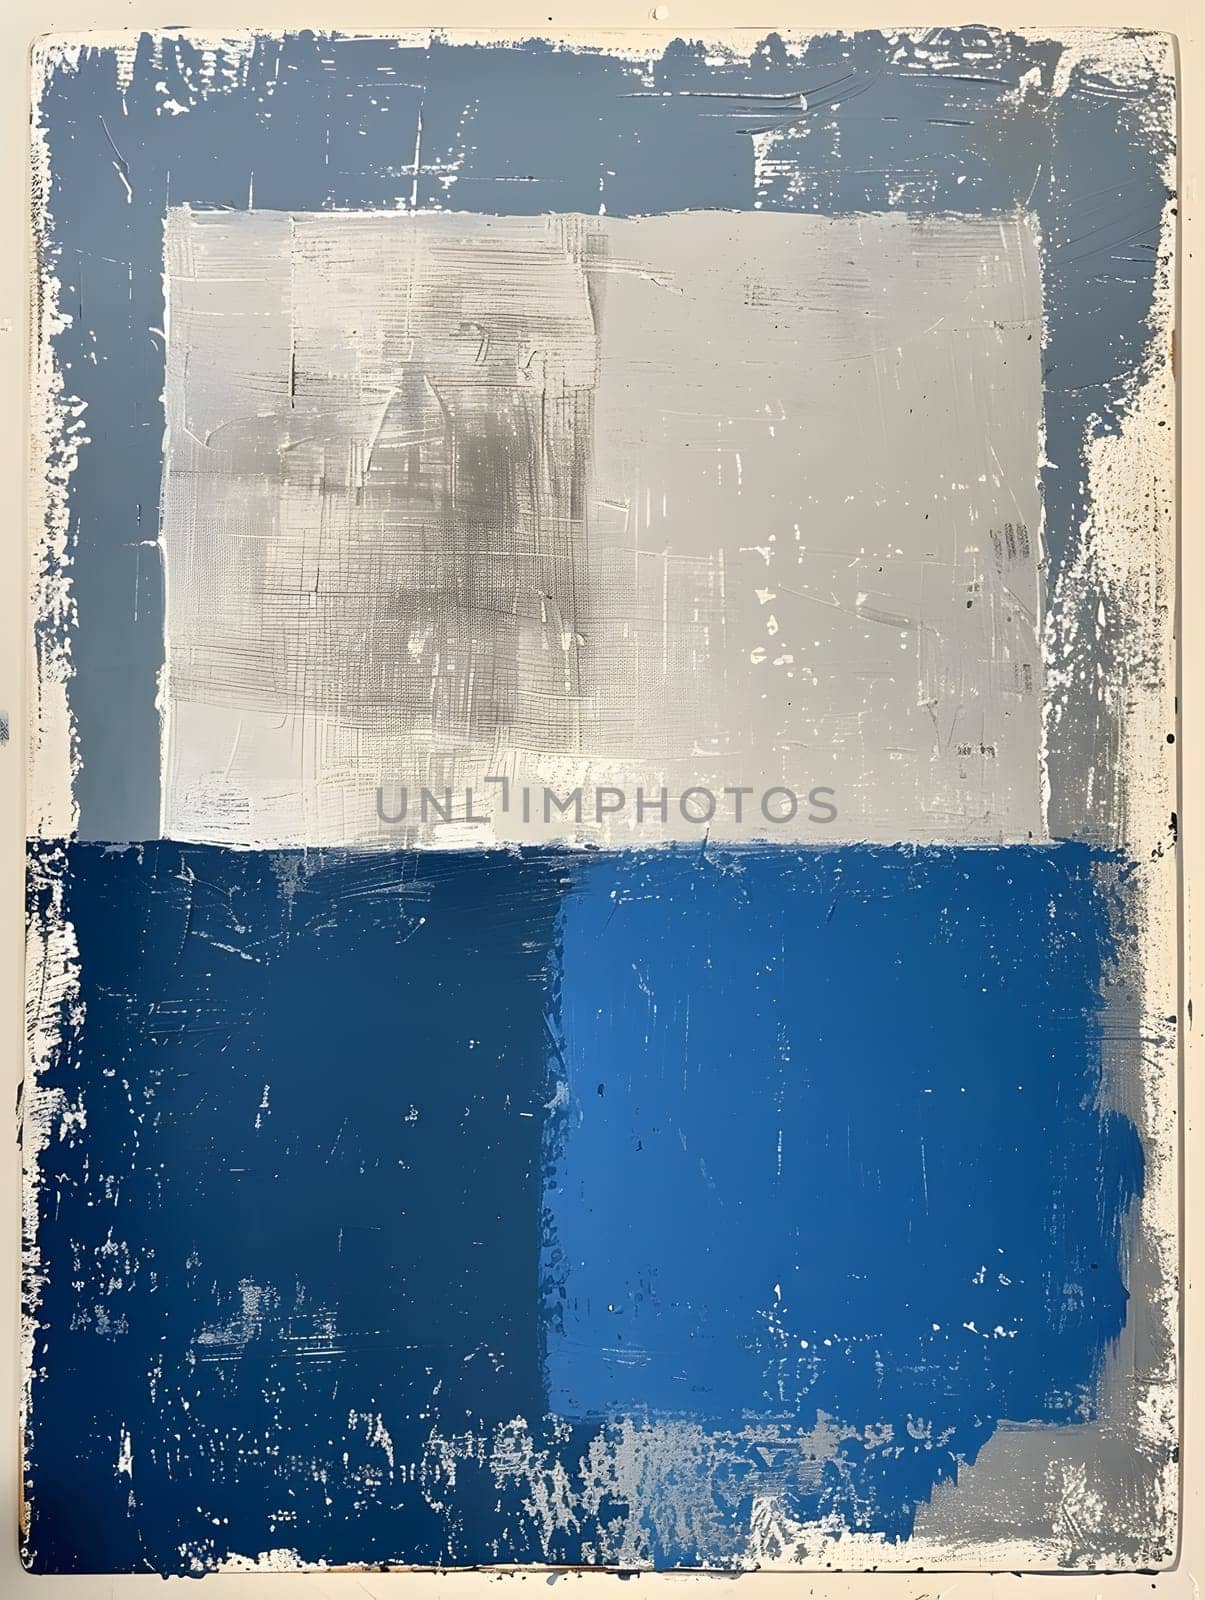 An electric blue and white painting featuring a square in the center, with fluid paint creating a glassy effect. The transparent material adds depth to the pattern of tints and shades